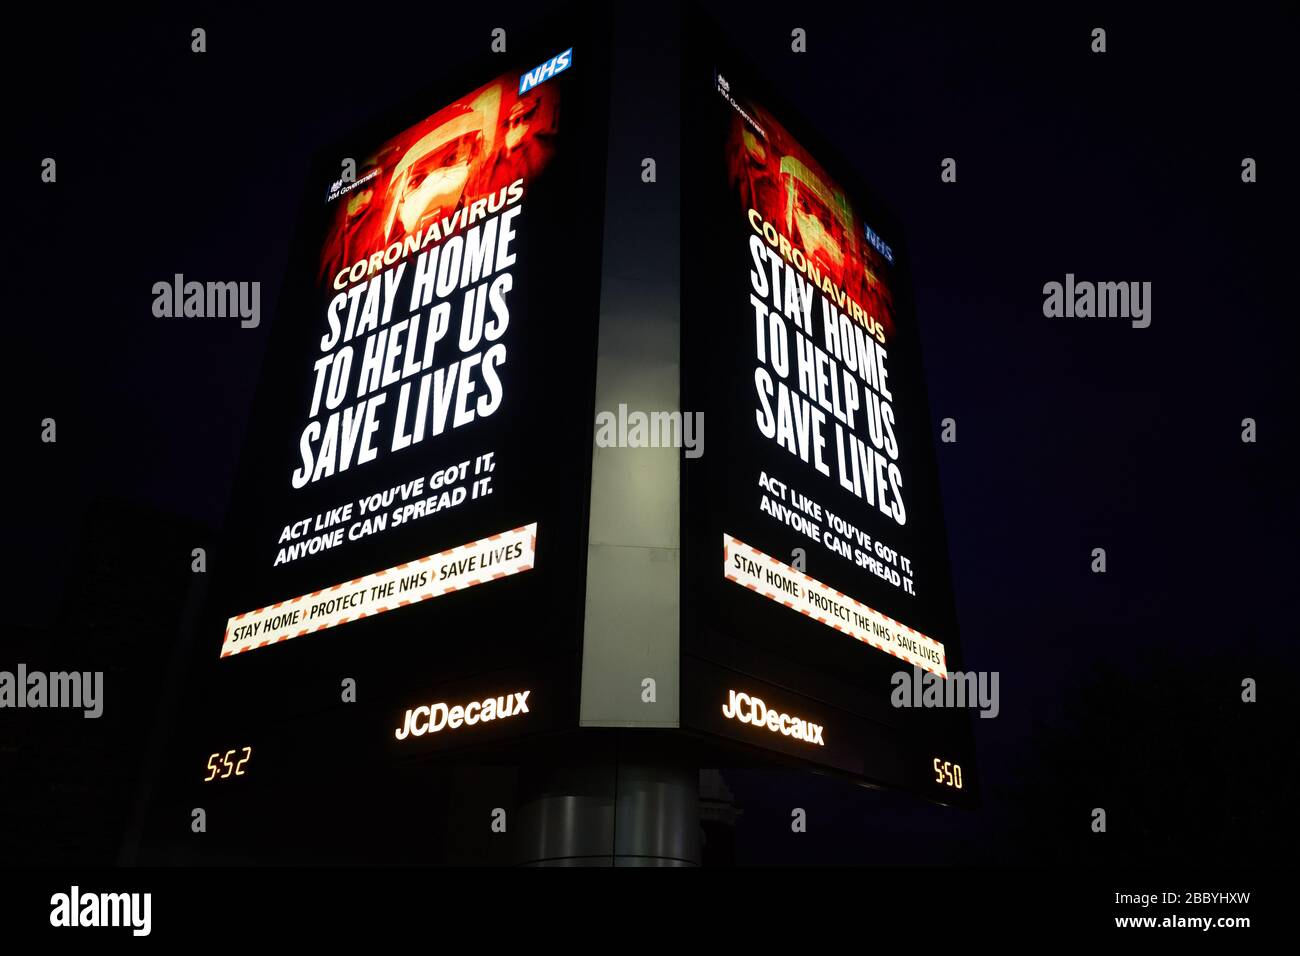 London, U.K. - 02 Apr 2020: A large electronic billboard message from the UK government, warning the public to stay at home during the coronavirus pandemic, lights the night sky. Stock Photo